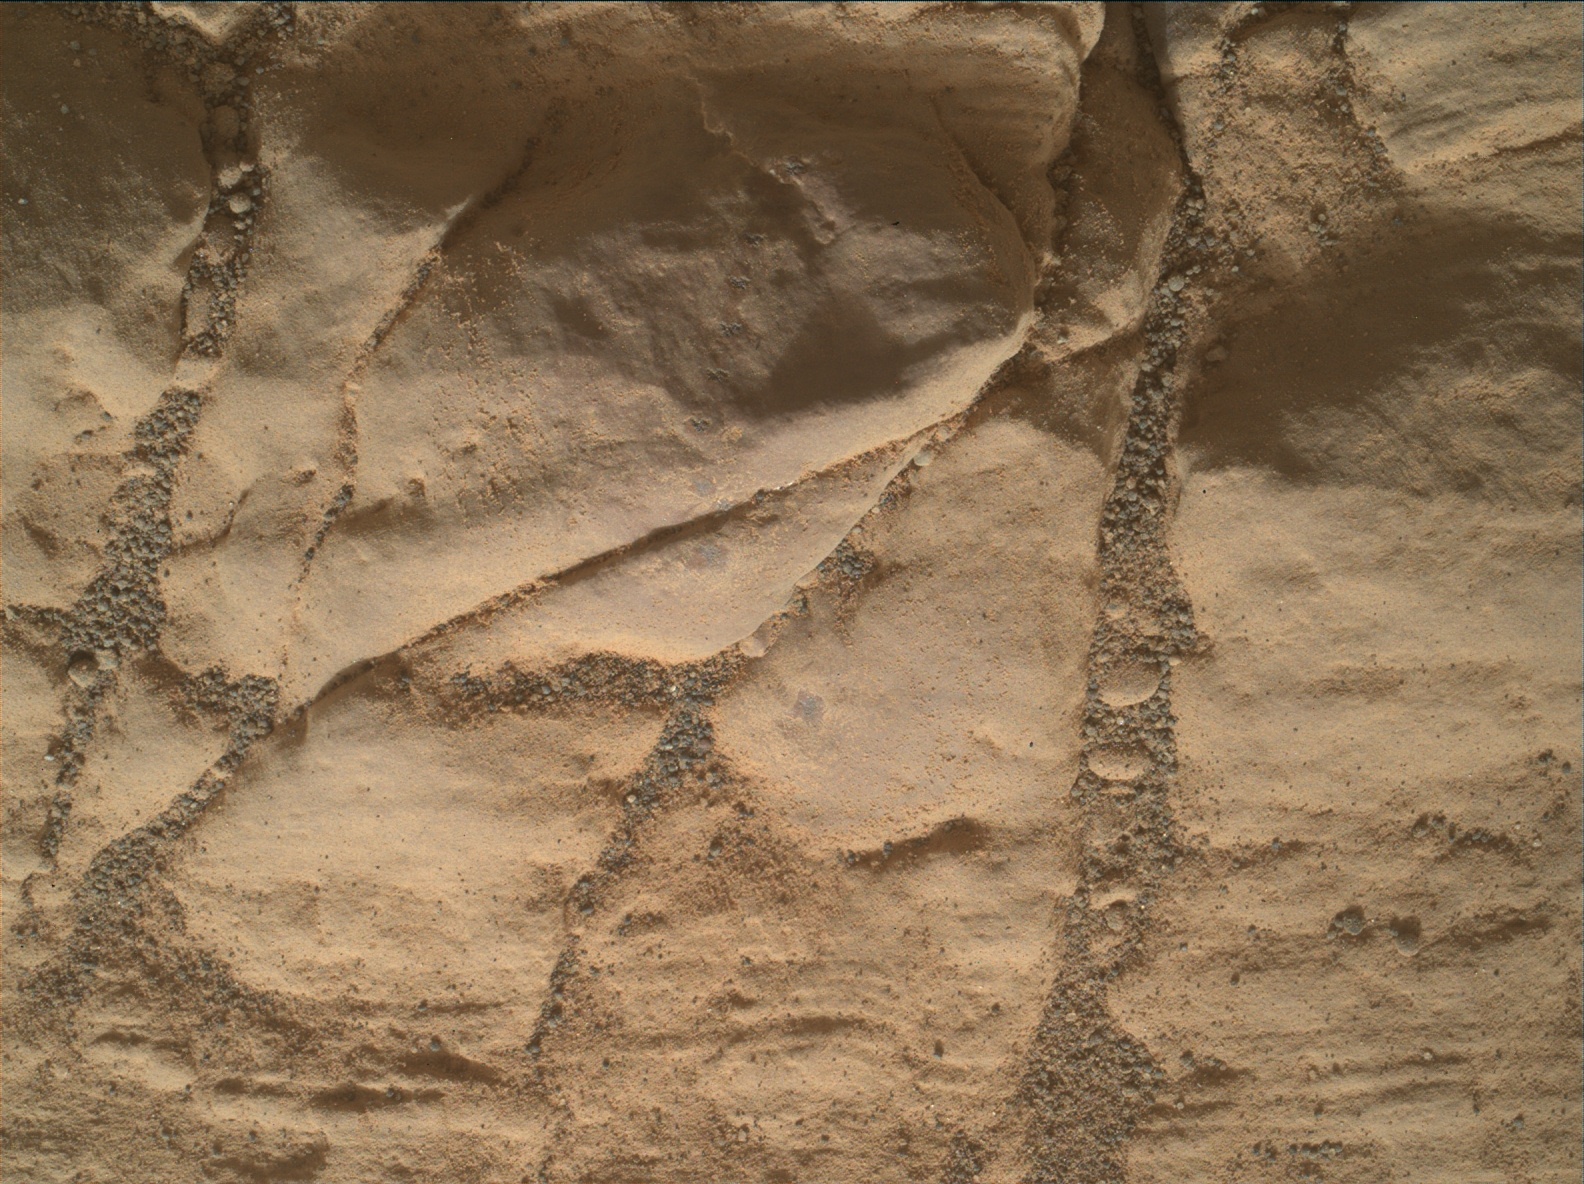 Nasa's Mars rover Curiosity acquired this image using its Mars Hand Lens Imager (MAHLI) on Sol 2473